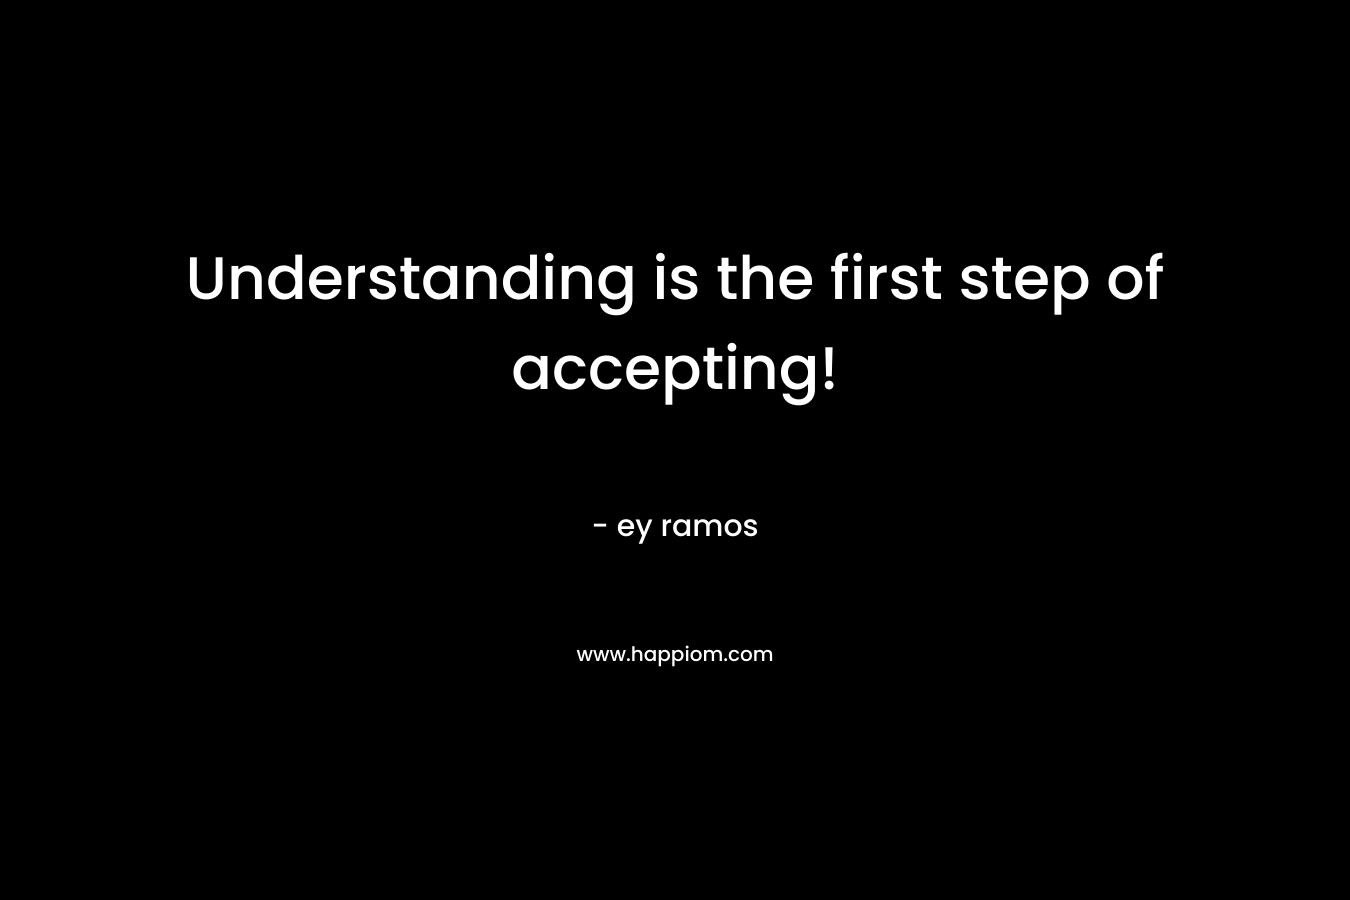 Understanding is the first step of accepting!